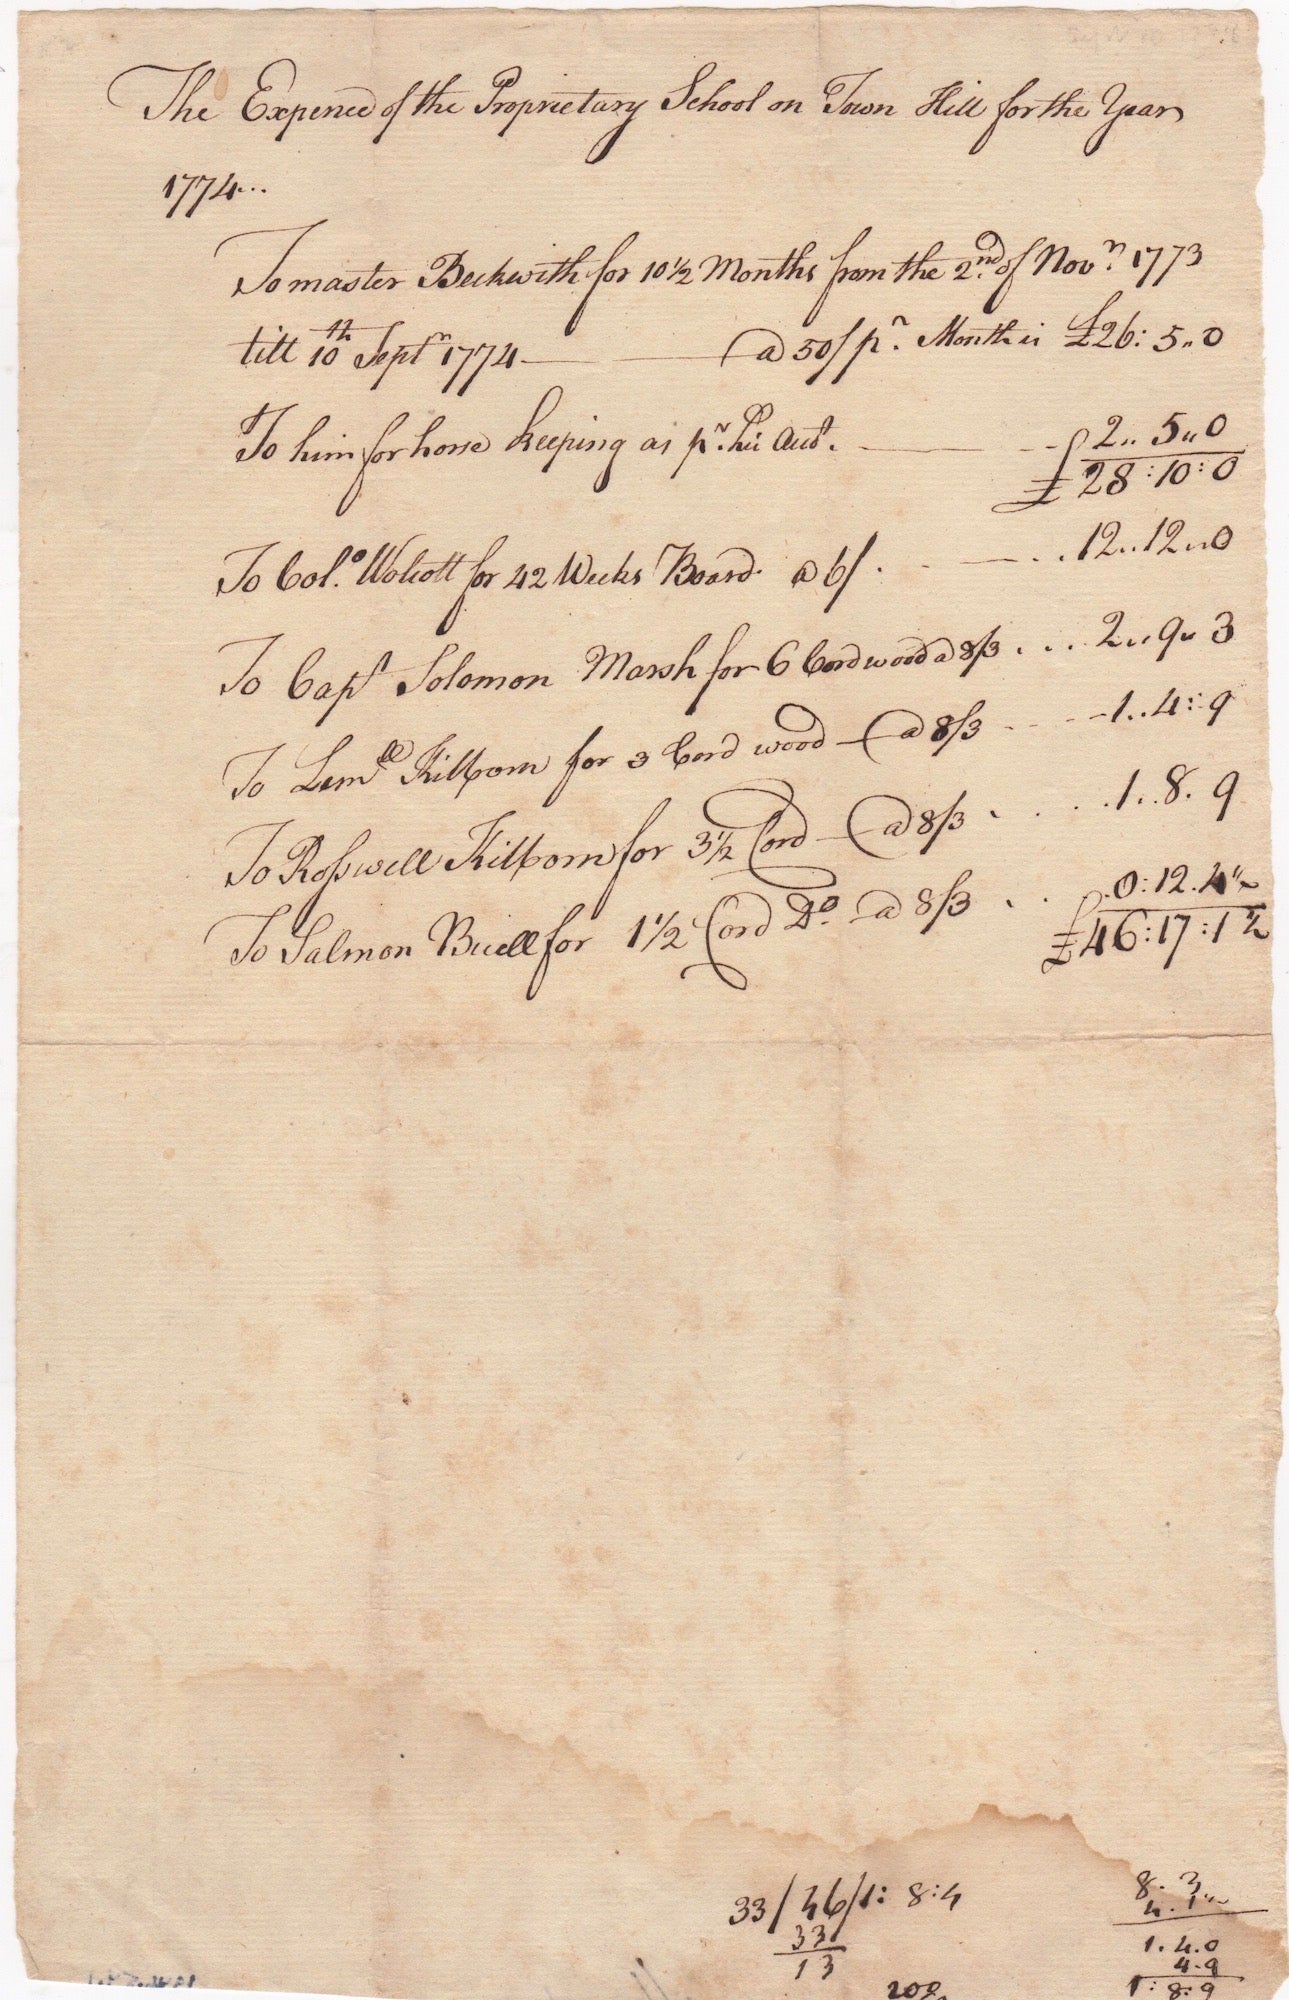 [Colonial Education. Connecticut. Wolcott, Oliver] - [Manuscript Expense Account] the Expense of the Proprietary School on Town Hill for the Year 1774